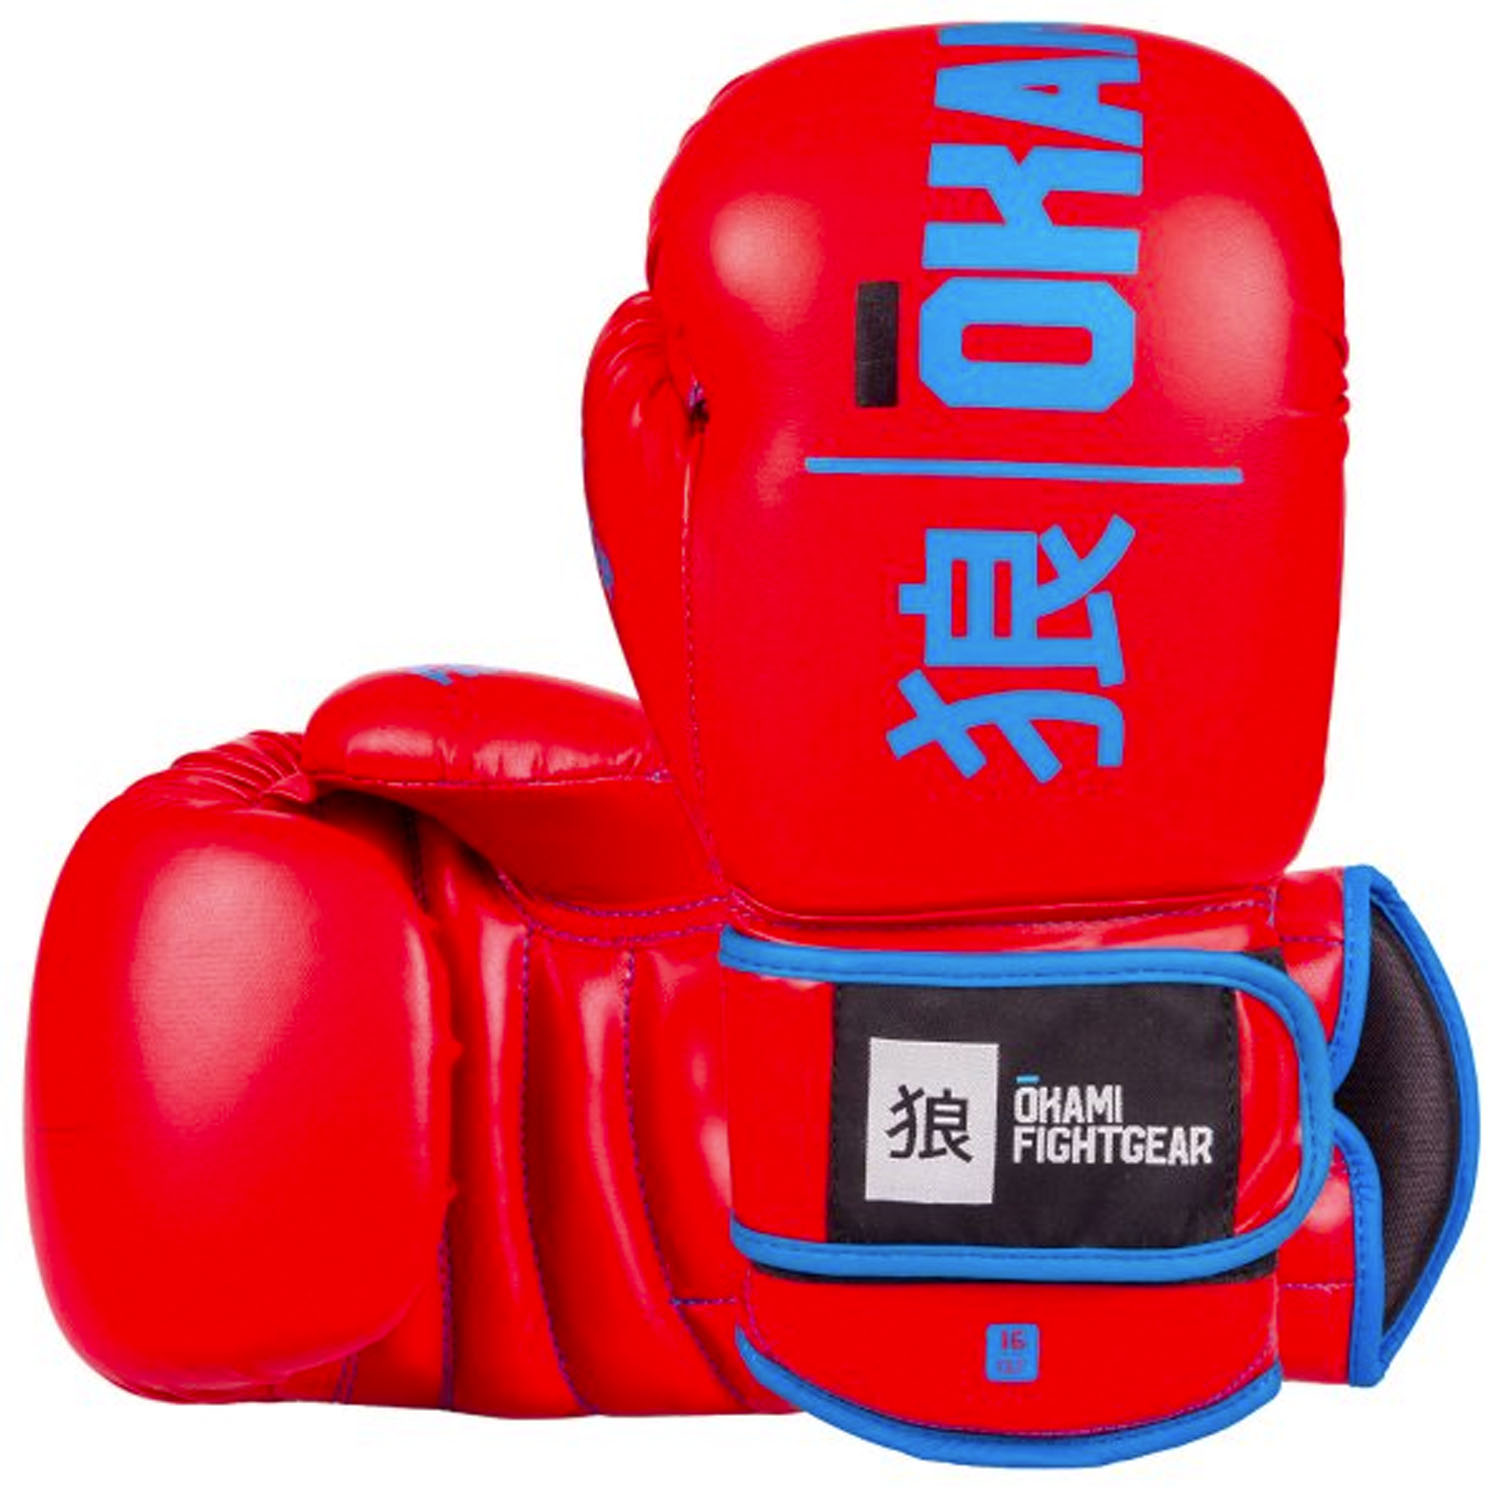 OKAMI Boxing Gloves, Red Rumble, 14 Oz